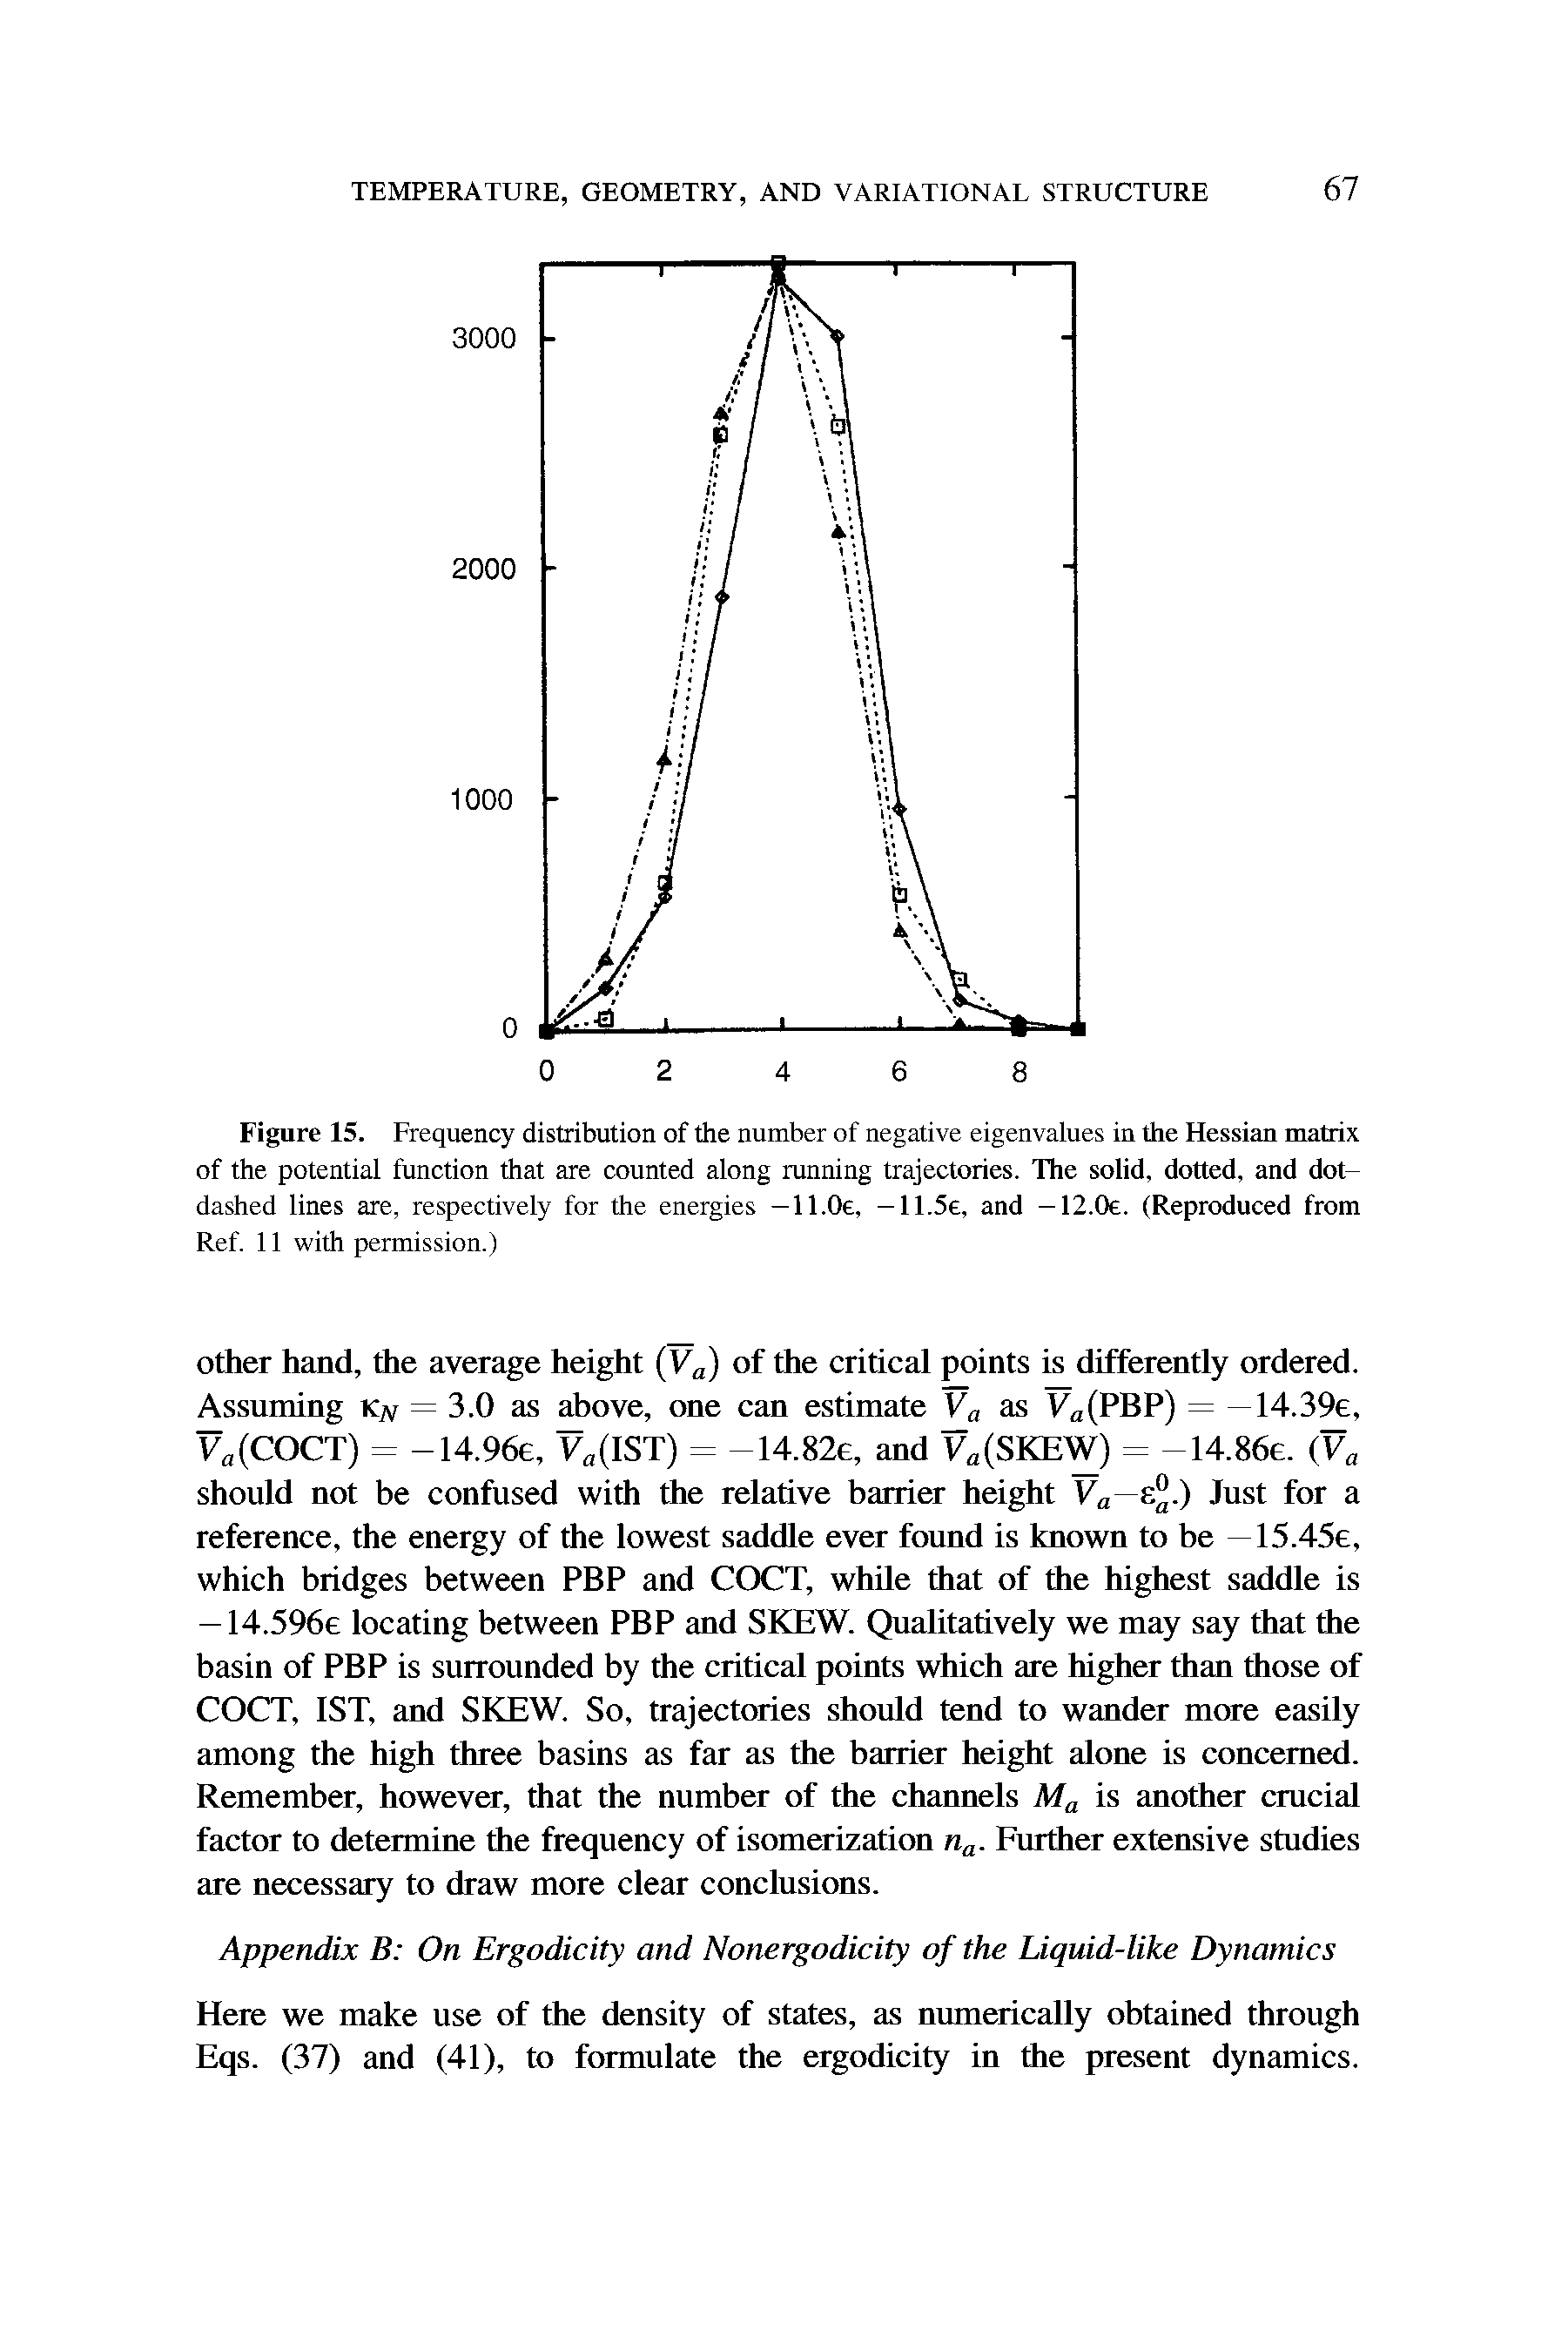 Figure 15. Frequency distribution of the number of negative eigenvalues in the Hessian matrix of the potential function that are counted along running trajectories. The solid, dotted, and dot-dashed lines are, respectively for the energies —ll.Oe, -11.5e, and -12.0e. (Reproduced from Ref. 11 with permission.)...